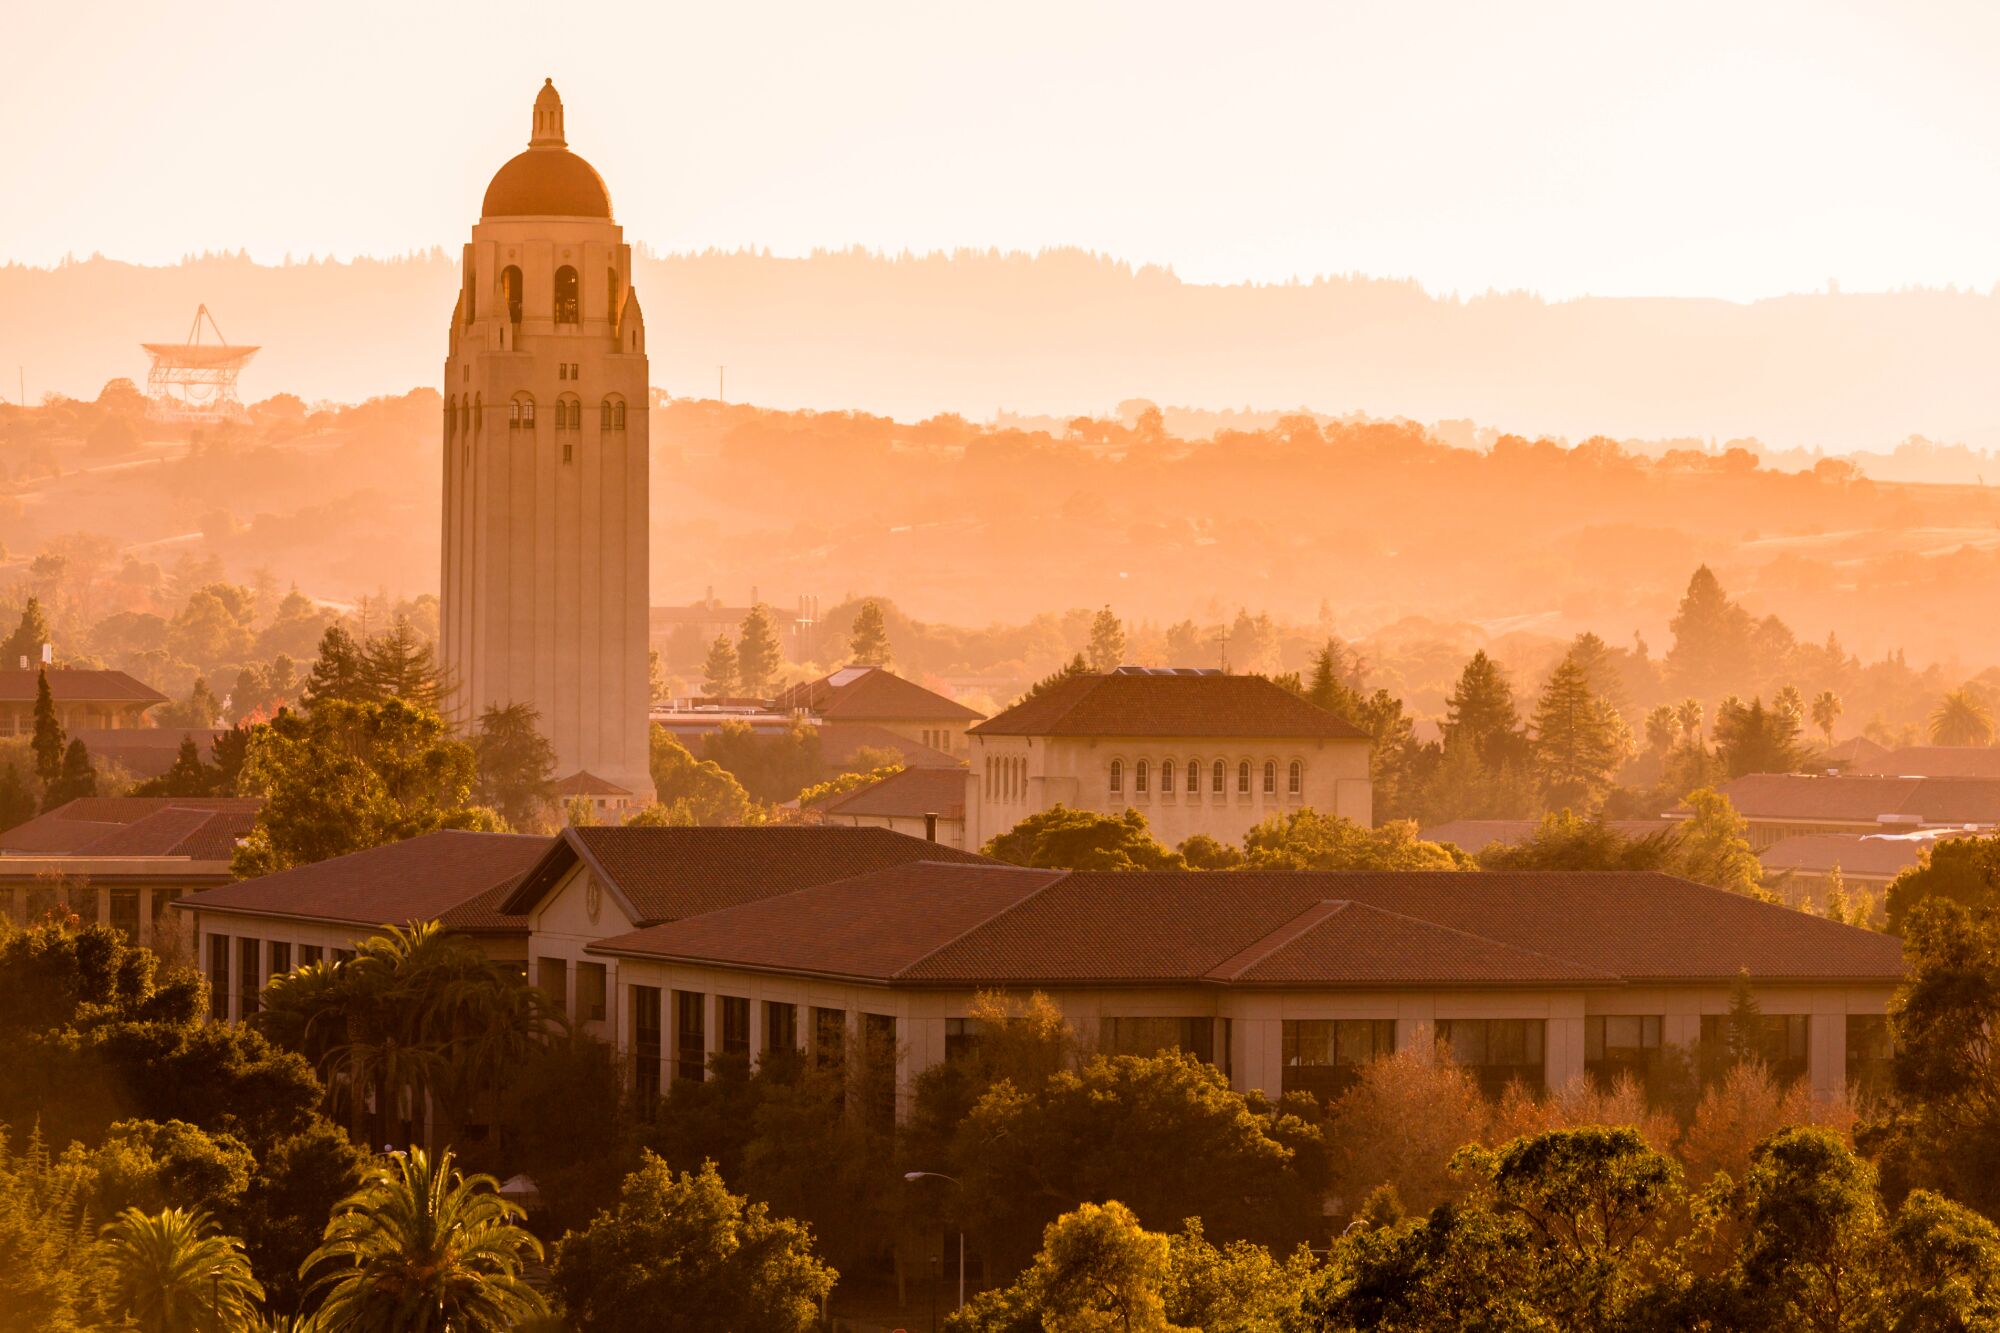 Stanford University's Hoover Tower rises above the Stanford campus